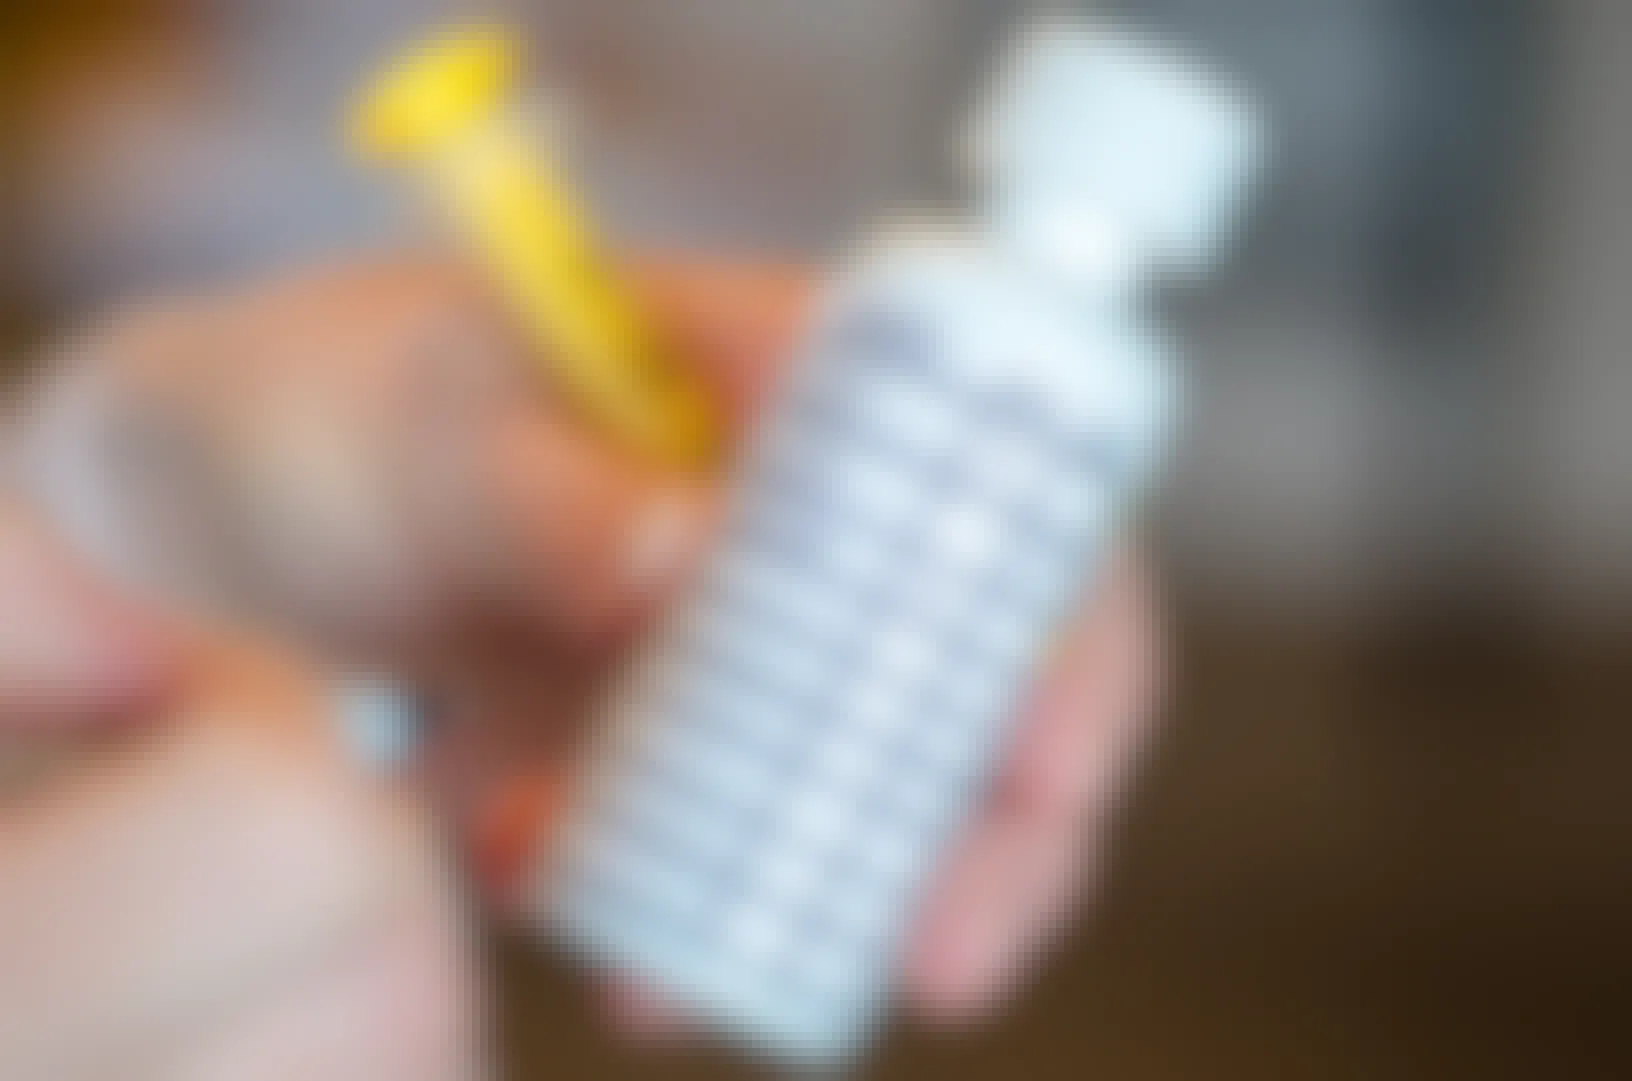 liquid pain reliever bottle with tracking chart